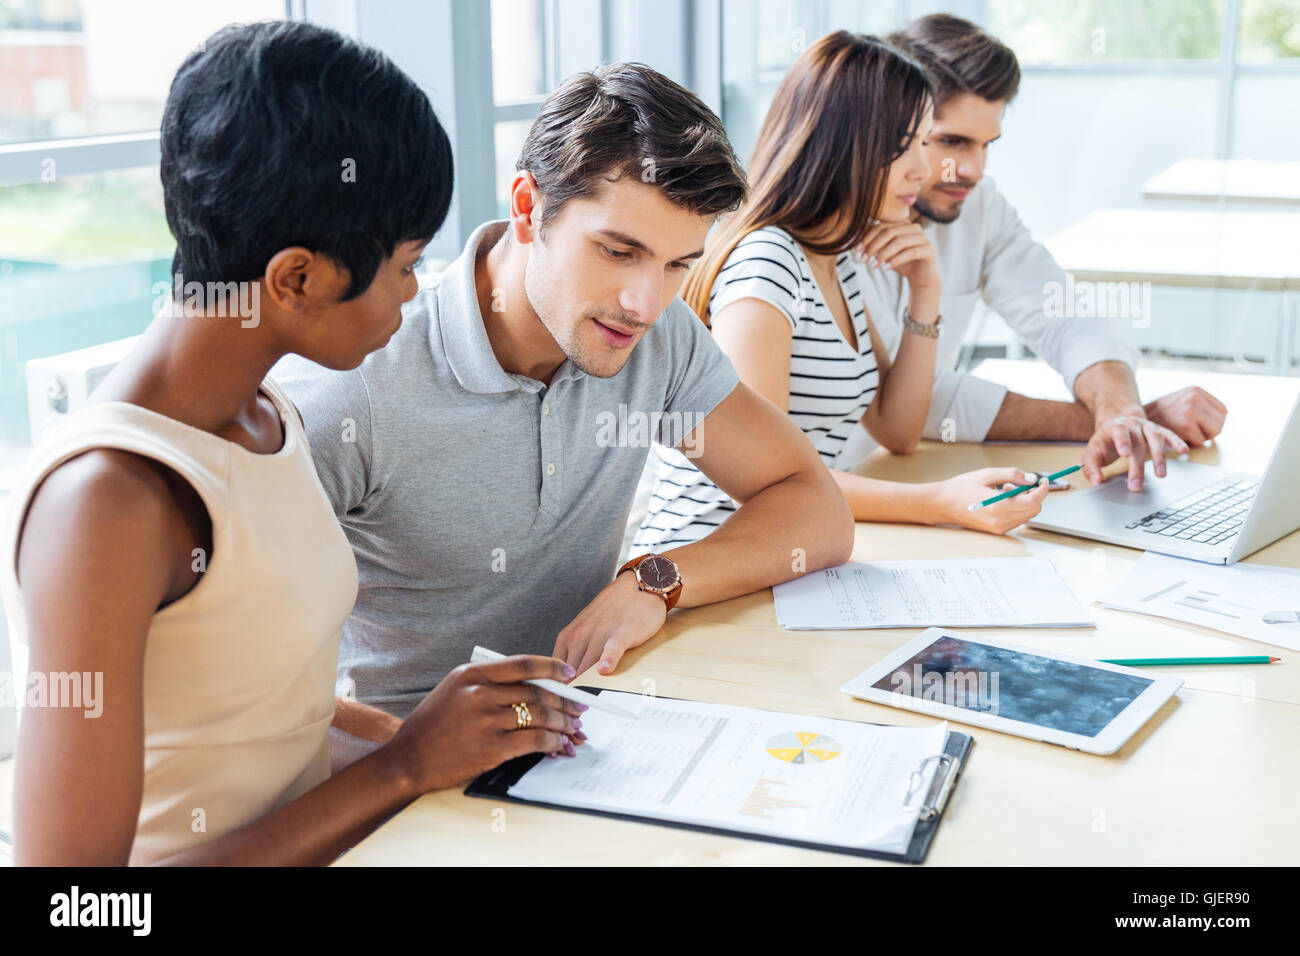 Multiethnic group of young business people creating business plan in office Stock Photo